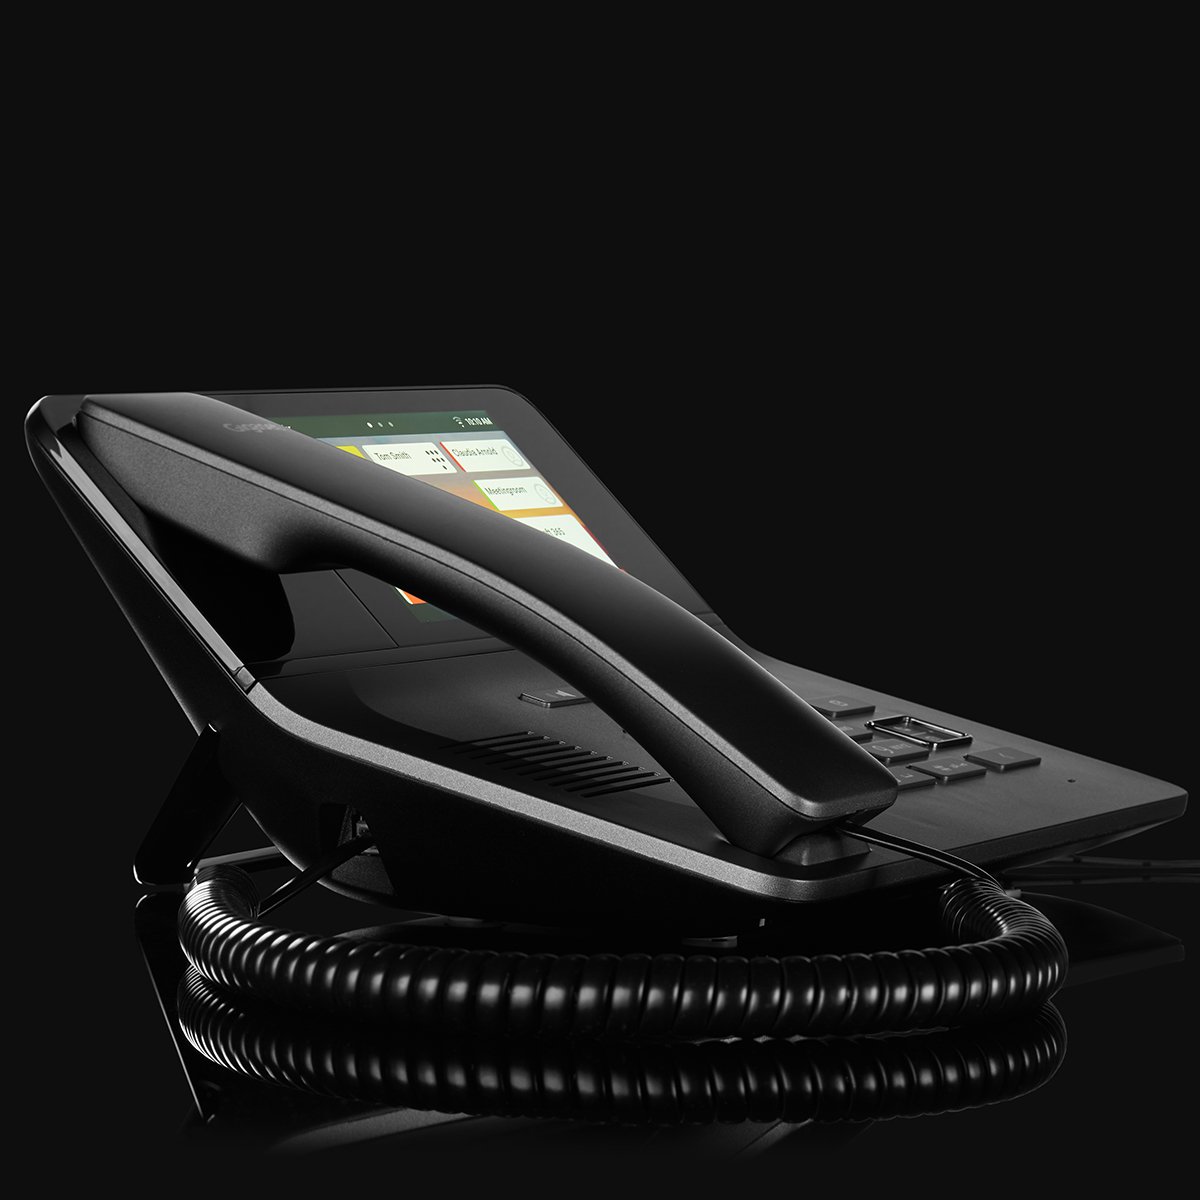 Gigaset Fusion: The innovative and elegant all-in-one phone system